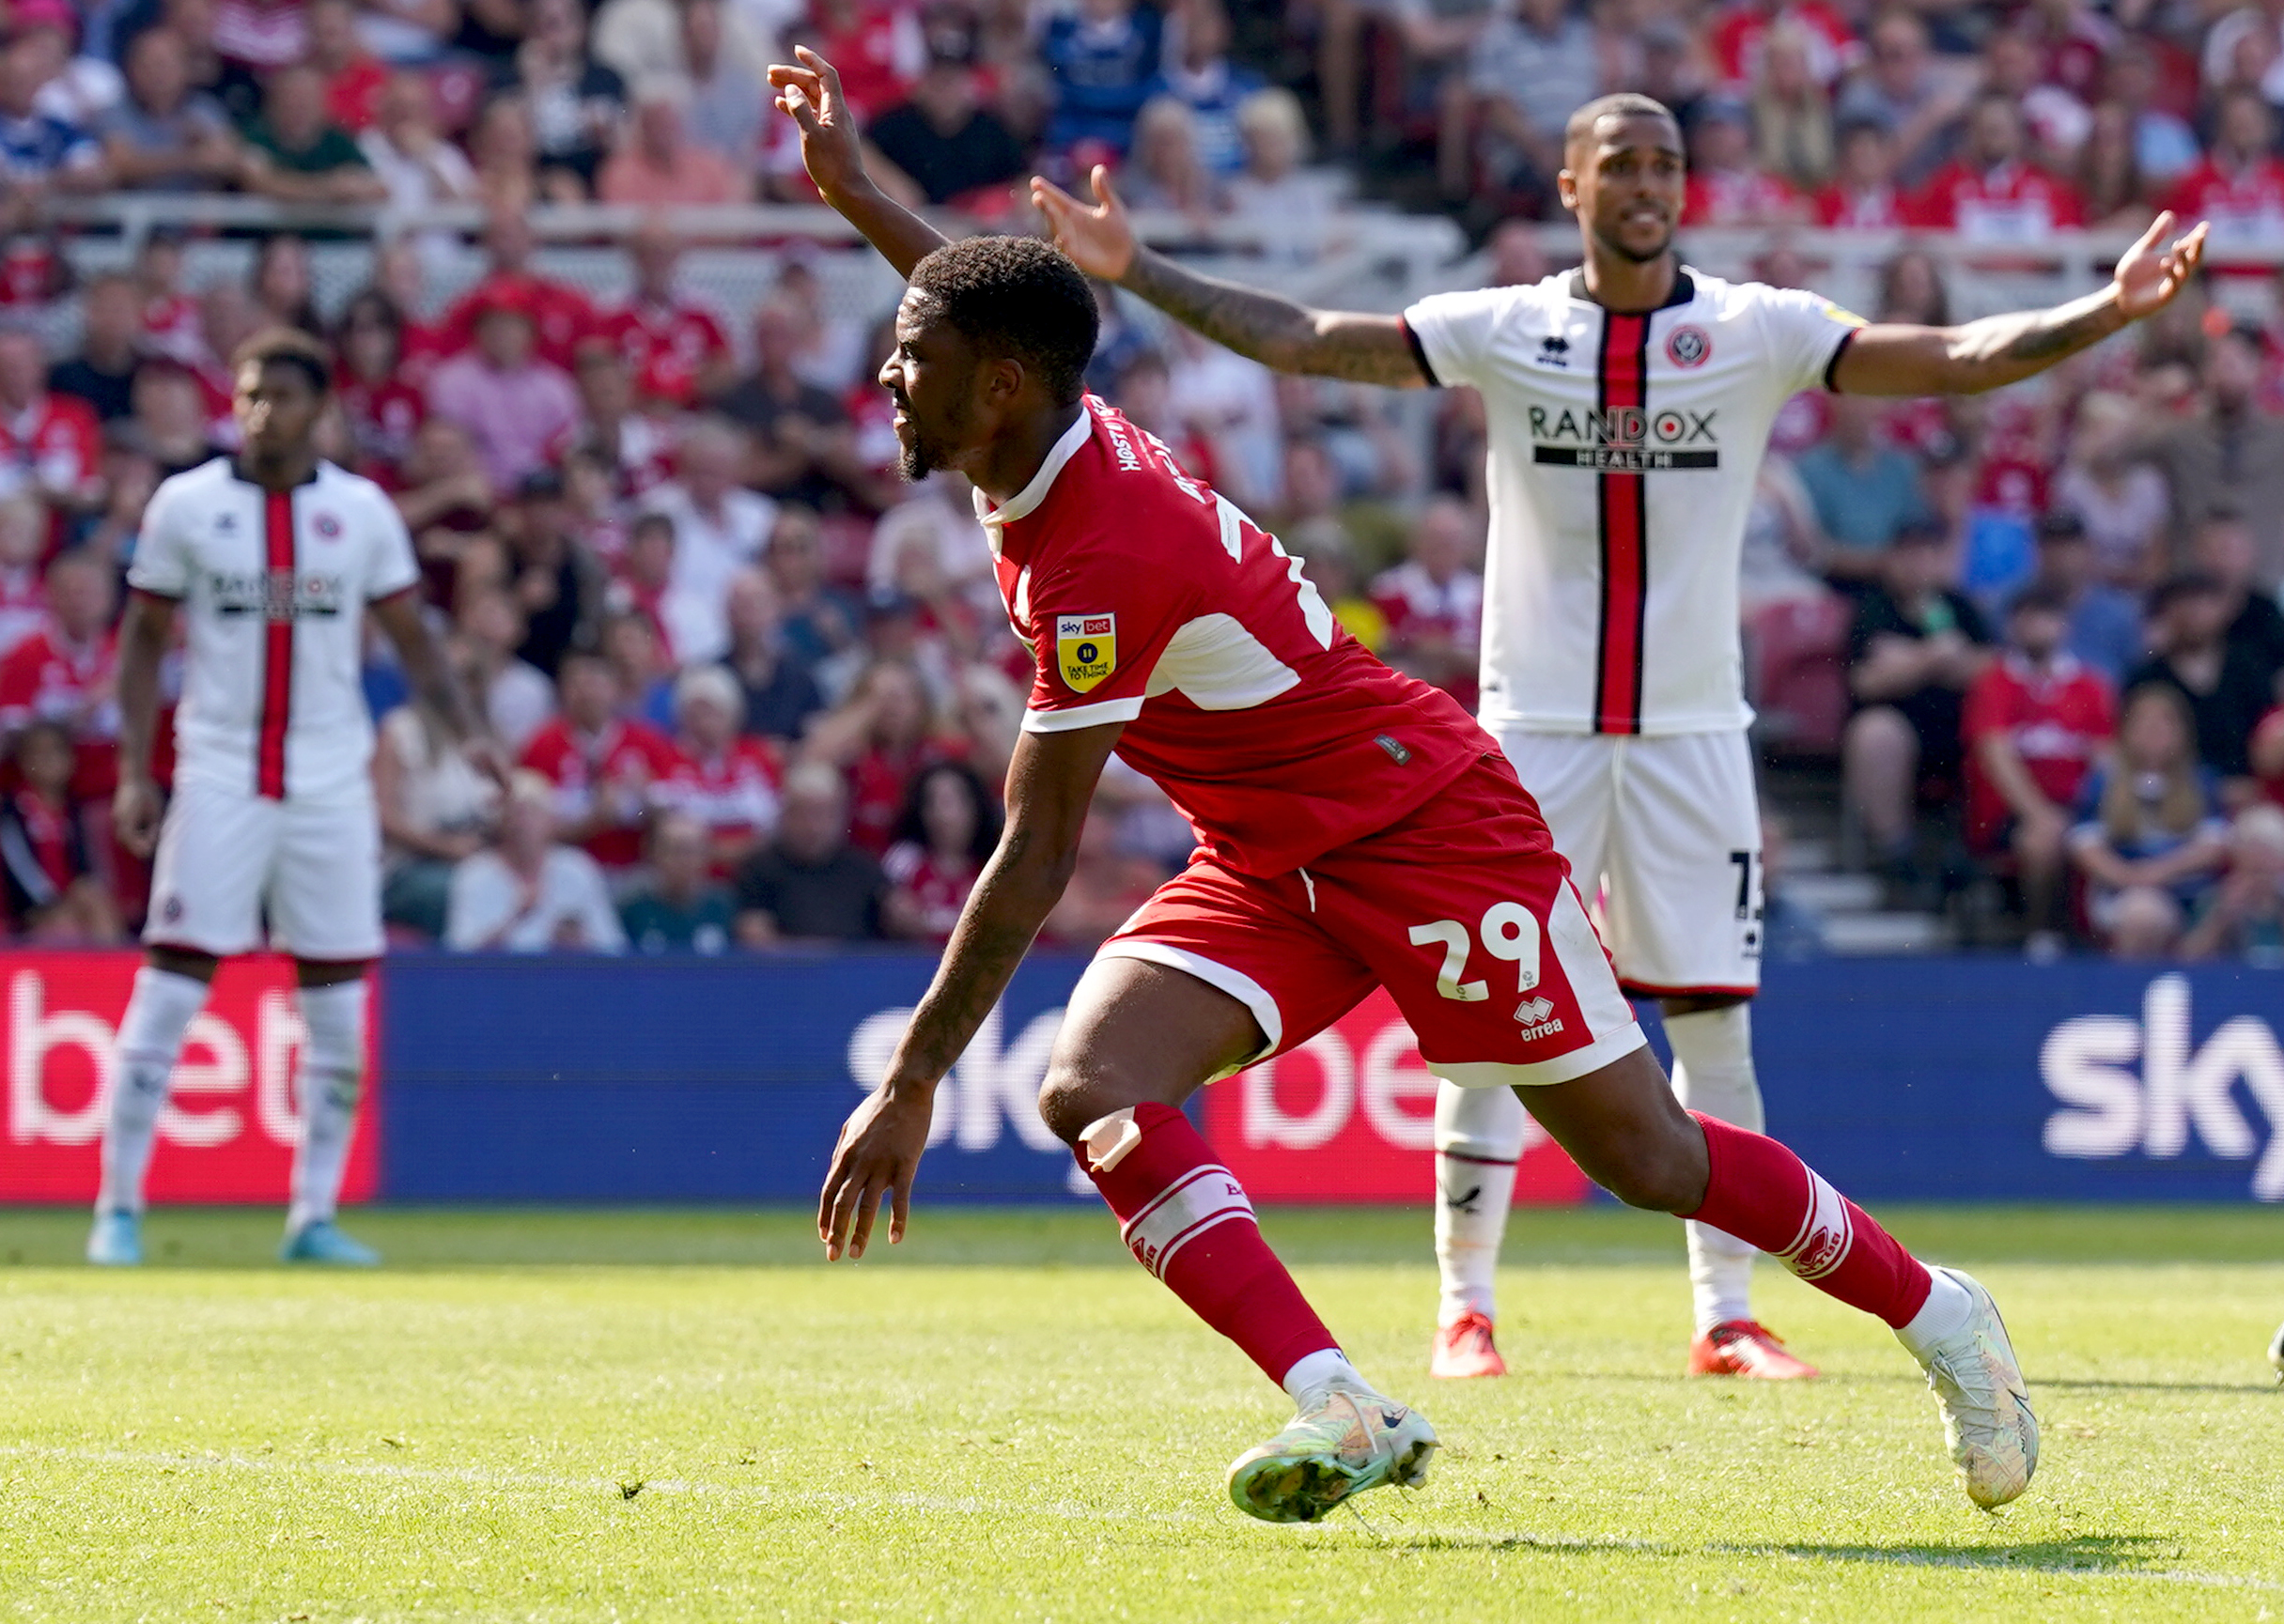 Chuba Akpom double rescues point for Middlesbrough to deny Sheffield United